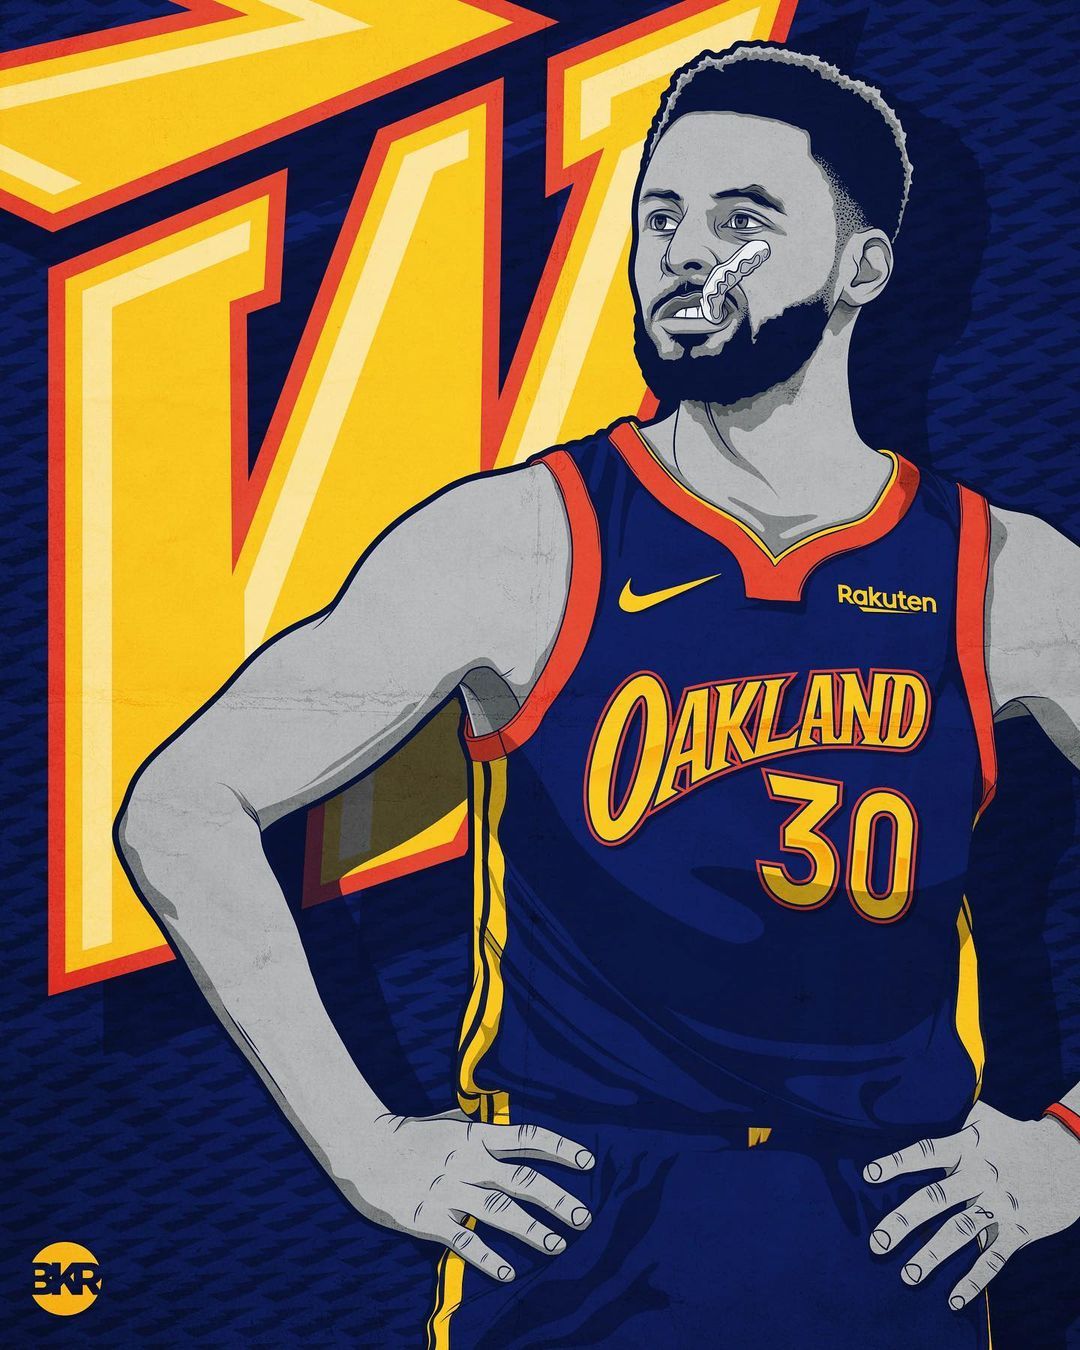 Jason Becker On Instagram: “How Do We Feel About The 20 21 City Edition Uniforms For. Stephen Curry Basketball, Nba Wallpaper Stephen Curry, Curry Nba